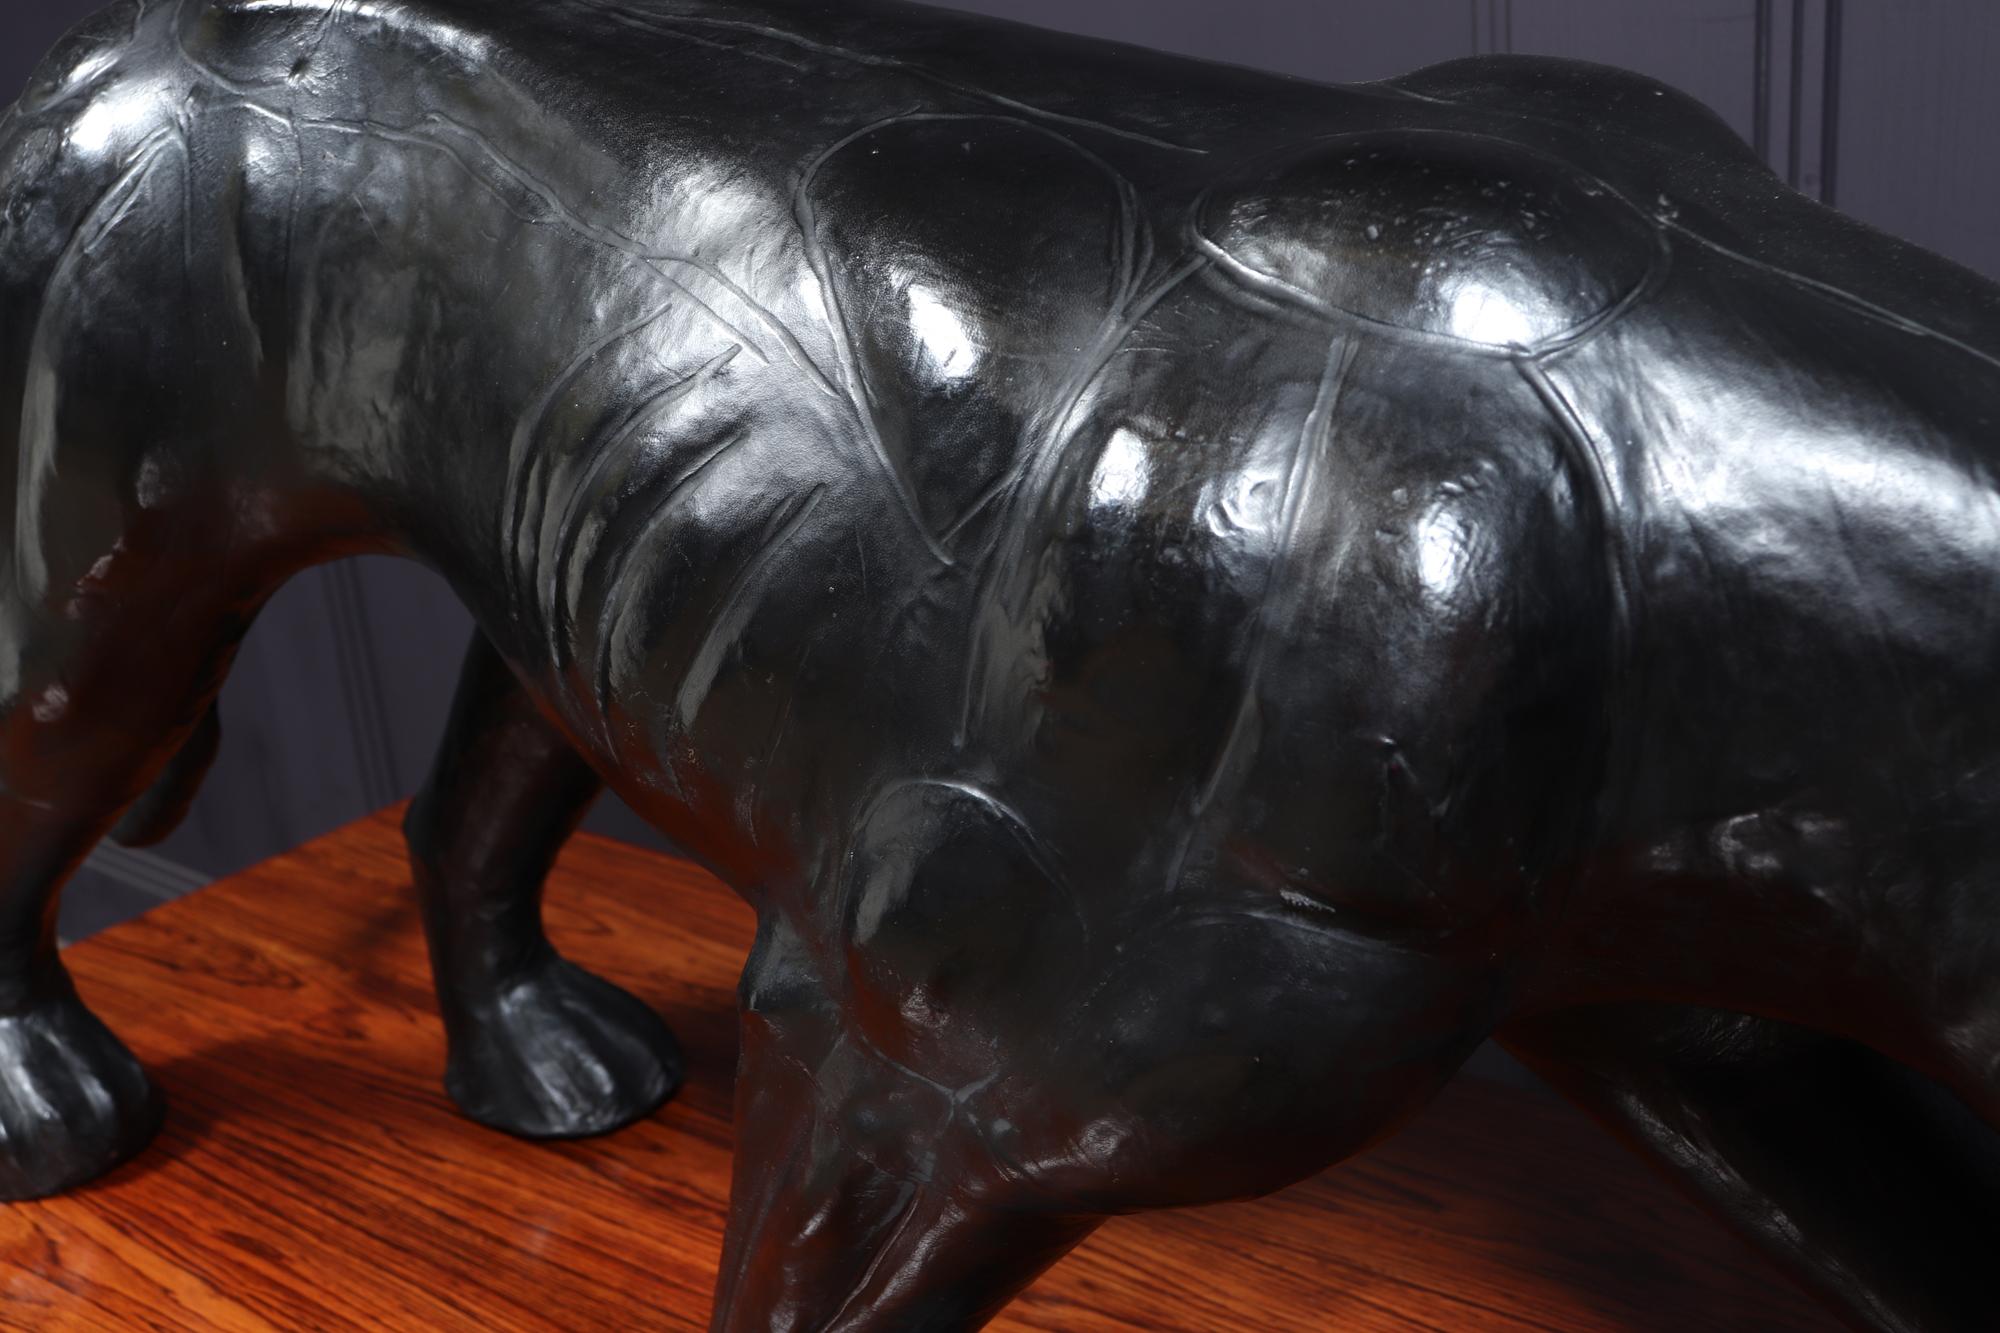 Large Leather Clad Panther Sculpture 4